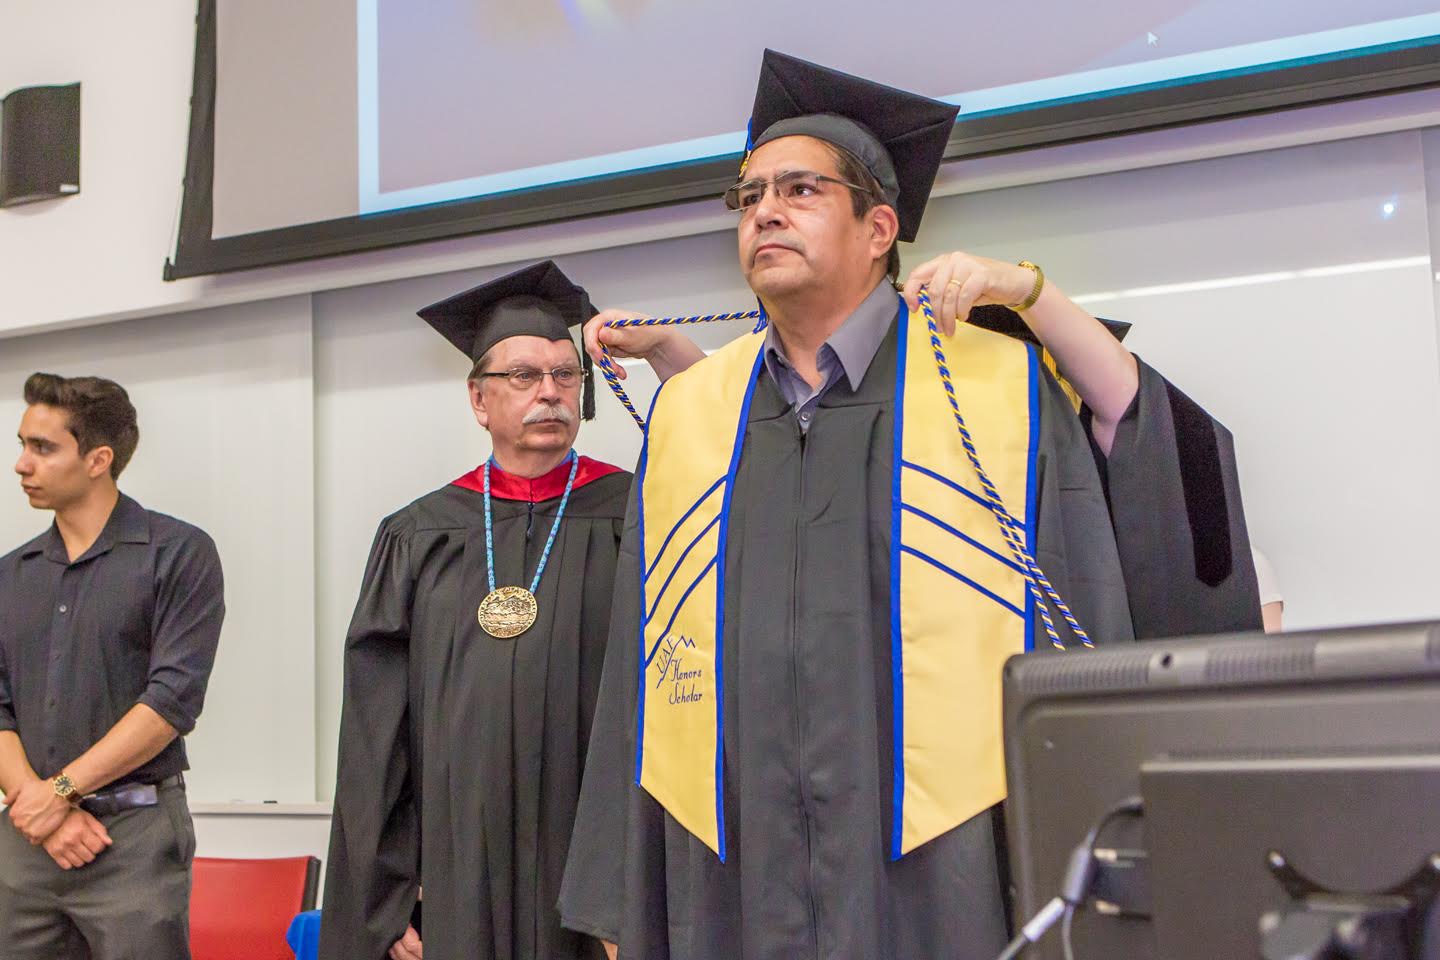 Jeff Thompson receives his cords and sash during the UAF Honors Program commencement ceremony May 9, 2015